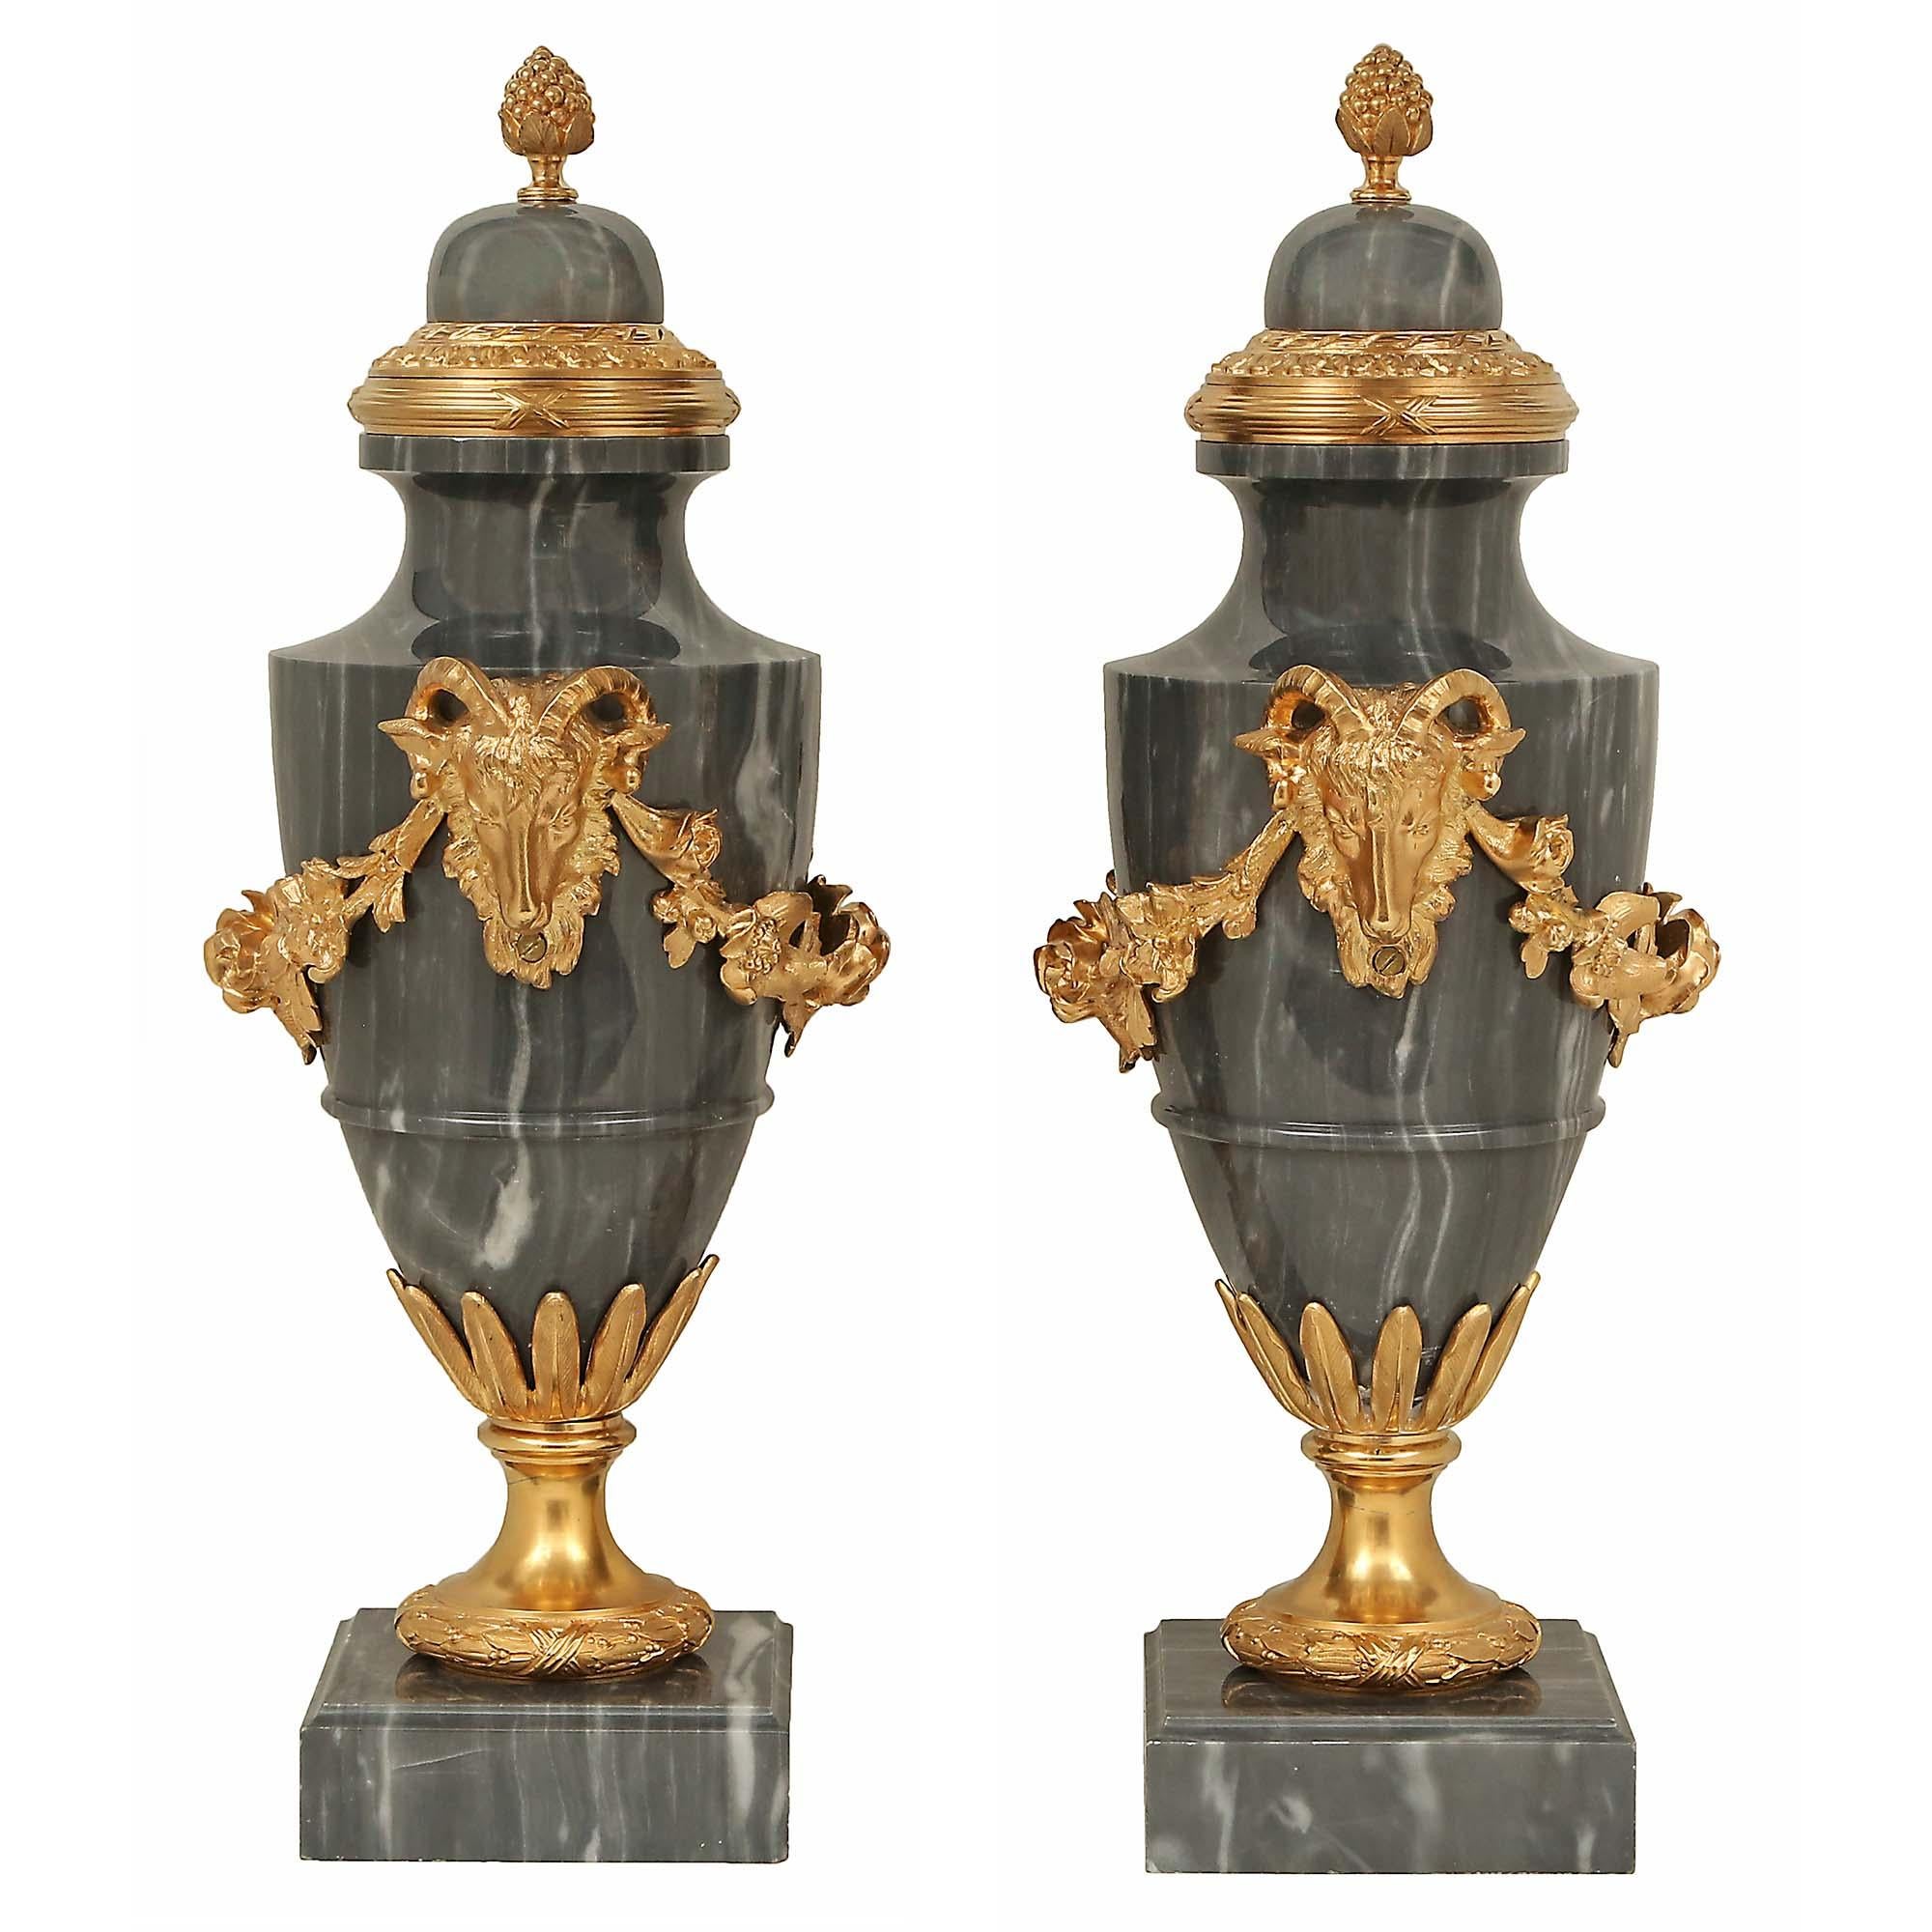 A striking pair of French 19th century Louis XVI st. Blue Turquin marble and ormolu urns. Each urn is raised by a square marble base with a mottled border and an ormolu satin and burnished socle pedestal with a finely chased berried laurel band. The